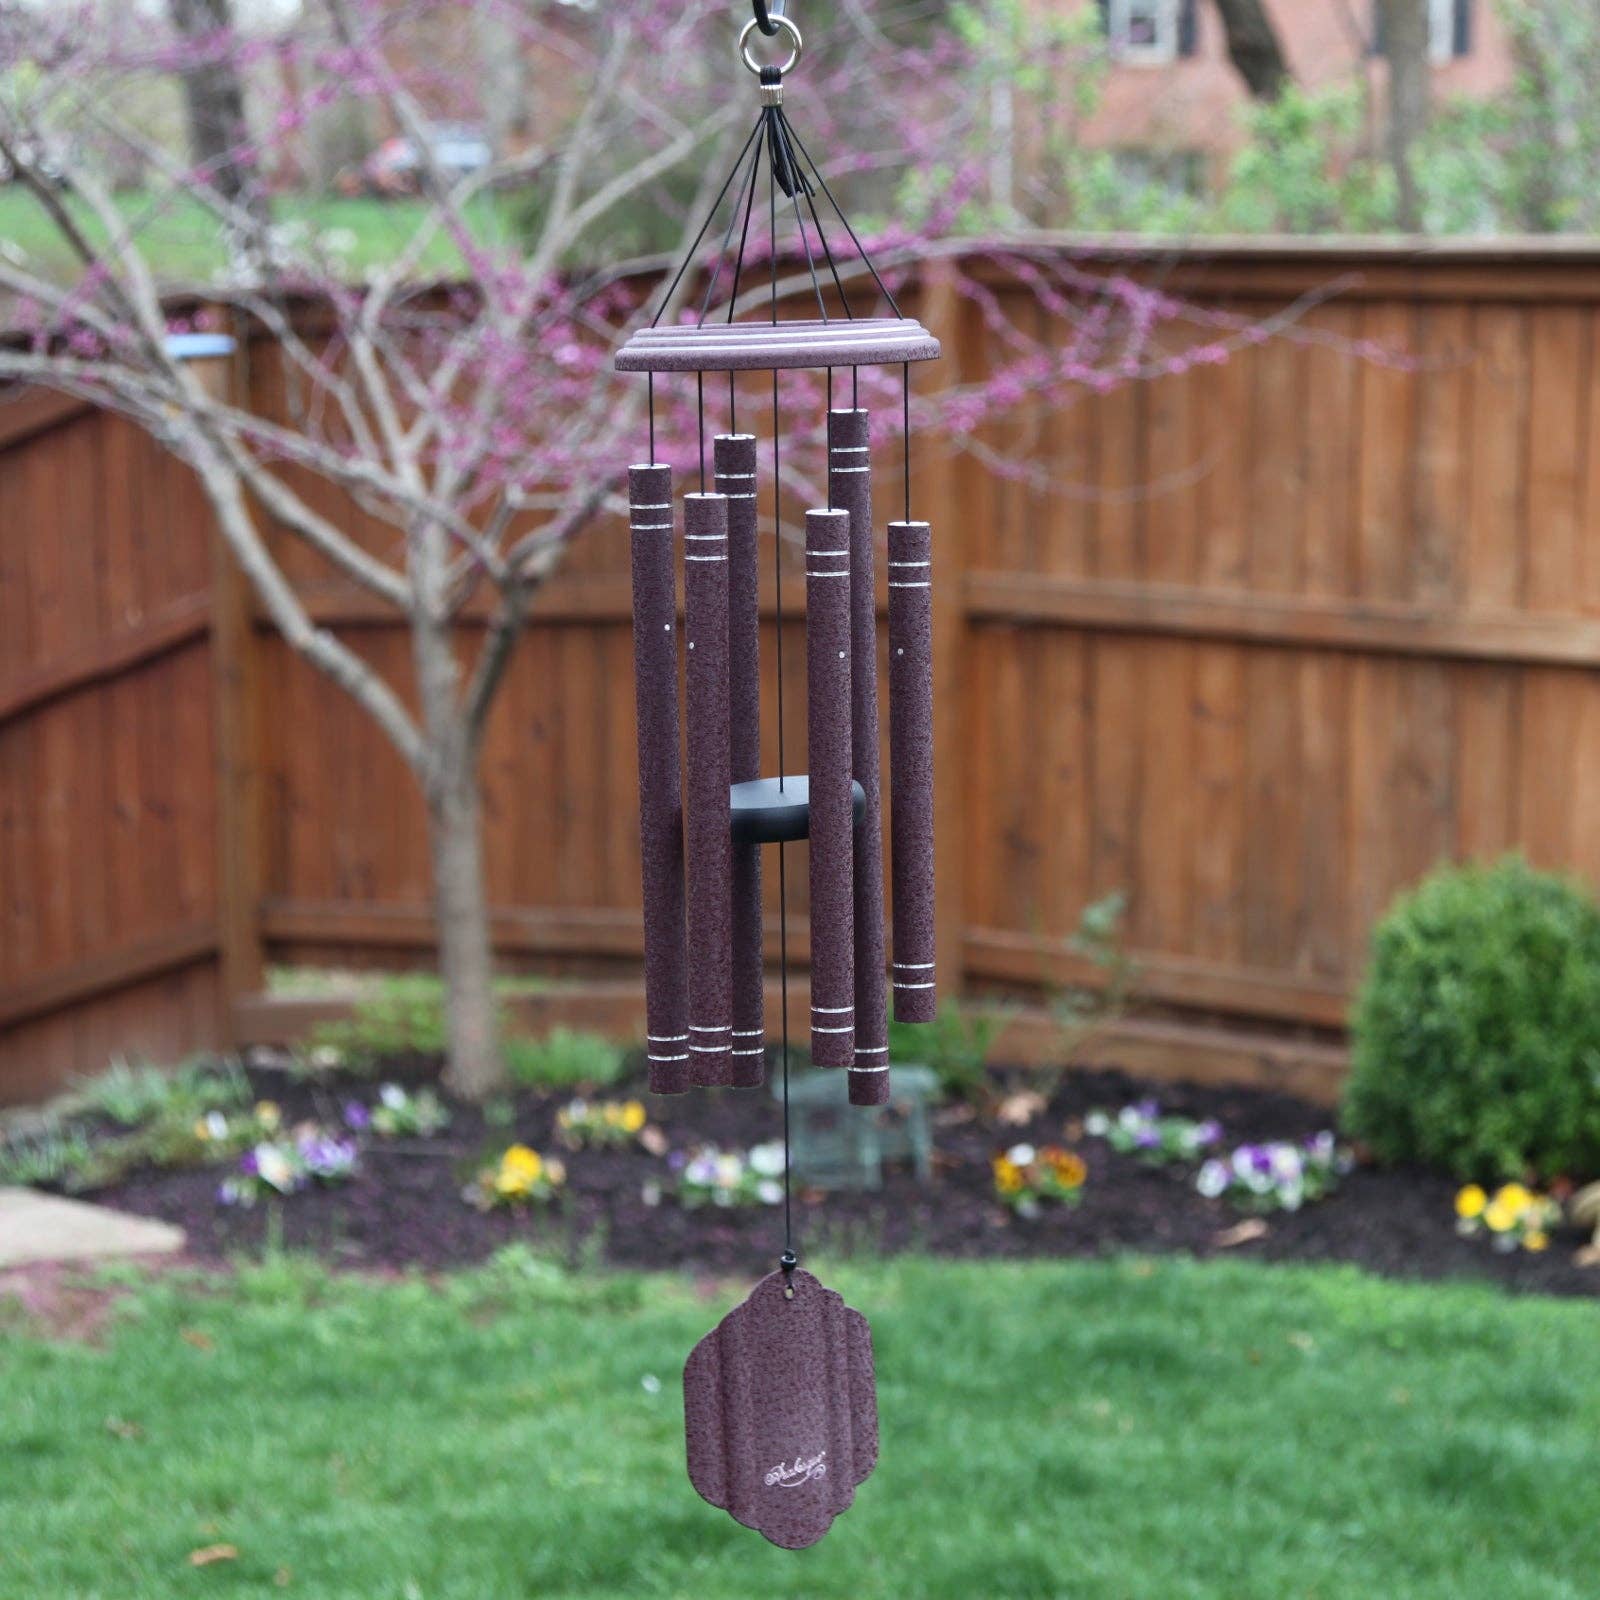 An intricately designed 32" Windchime Arabesque® hanging from a fence in a serene backyard, producing high-quality sound.